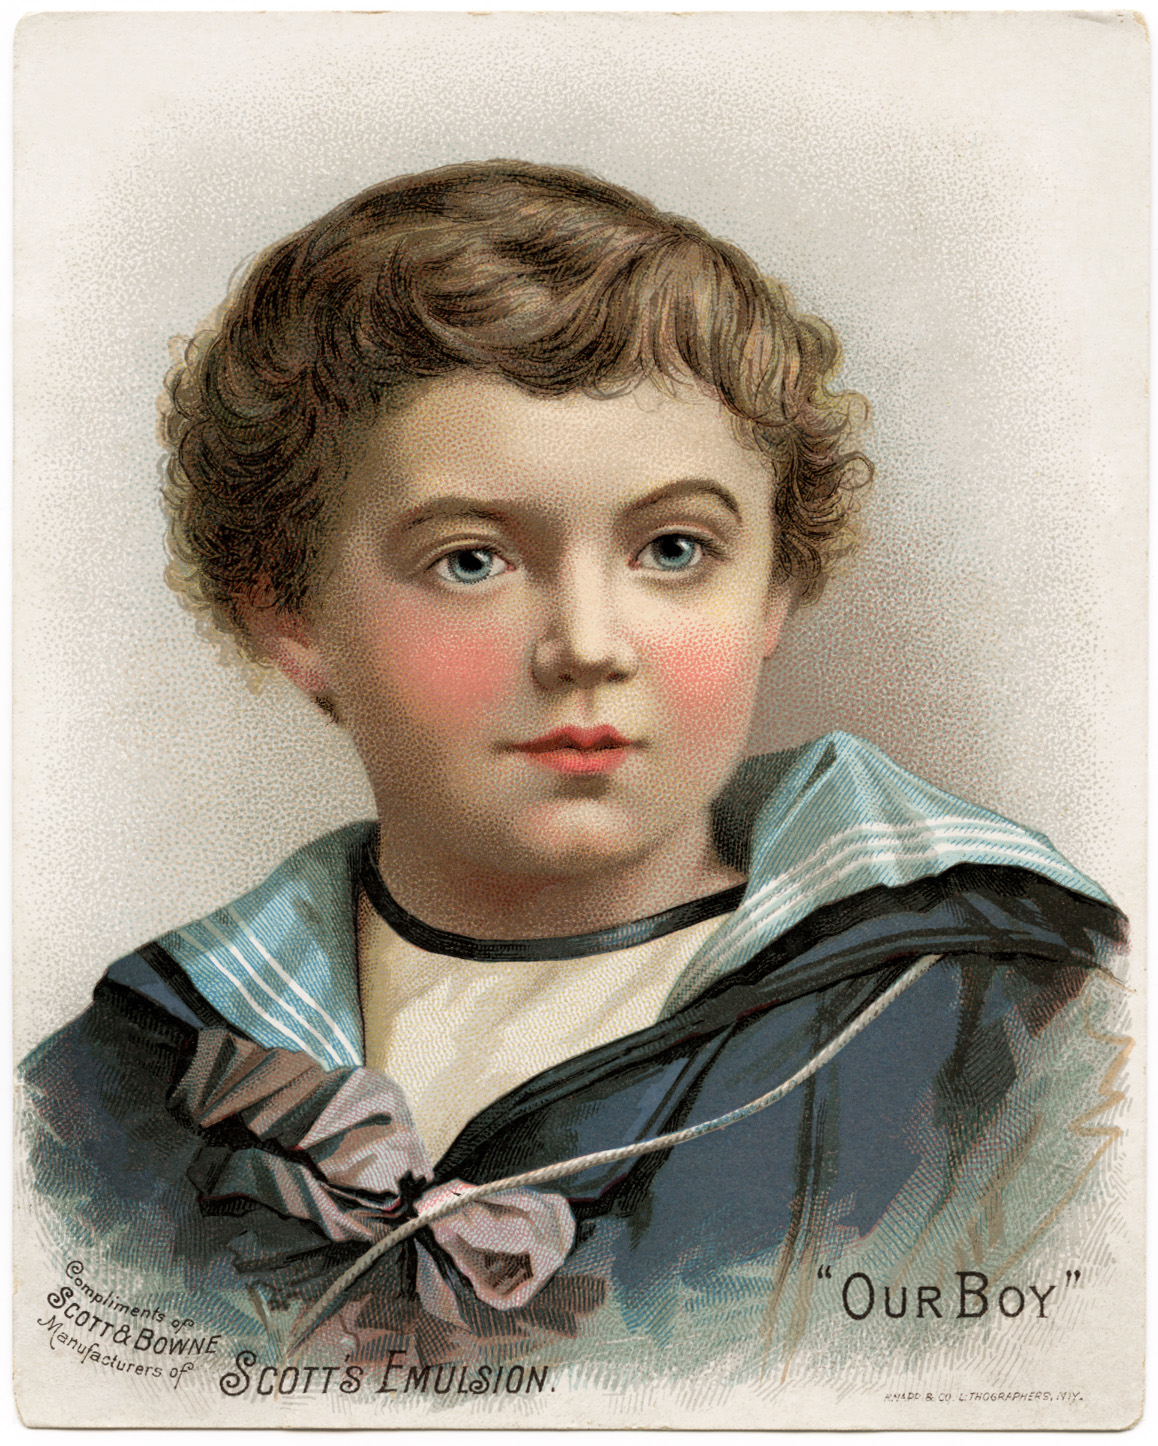 our boy scotts emulsion, vintage trading card, victorian ad card, free vintage image, free printable, free victorian clipart, vintage ephemera digital download, public domain image for graphic design, vintage image for scrapbooking, victorian card